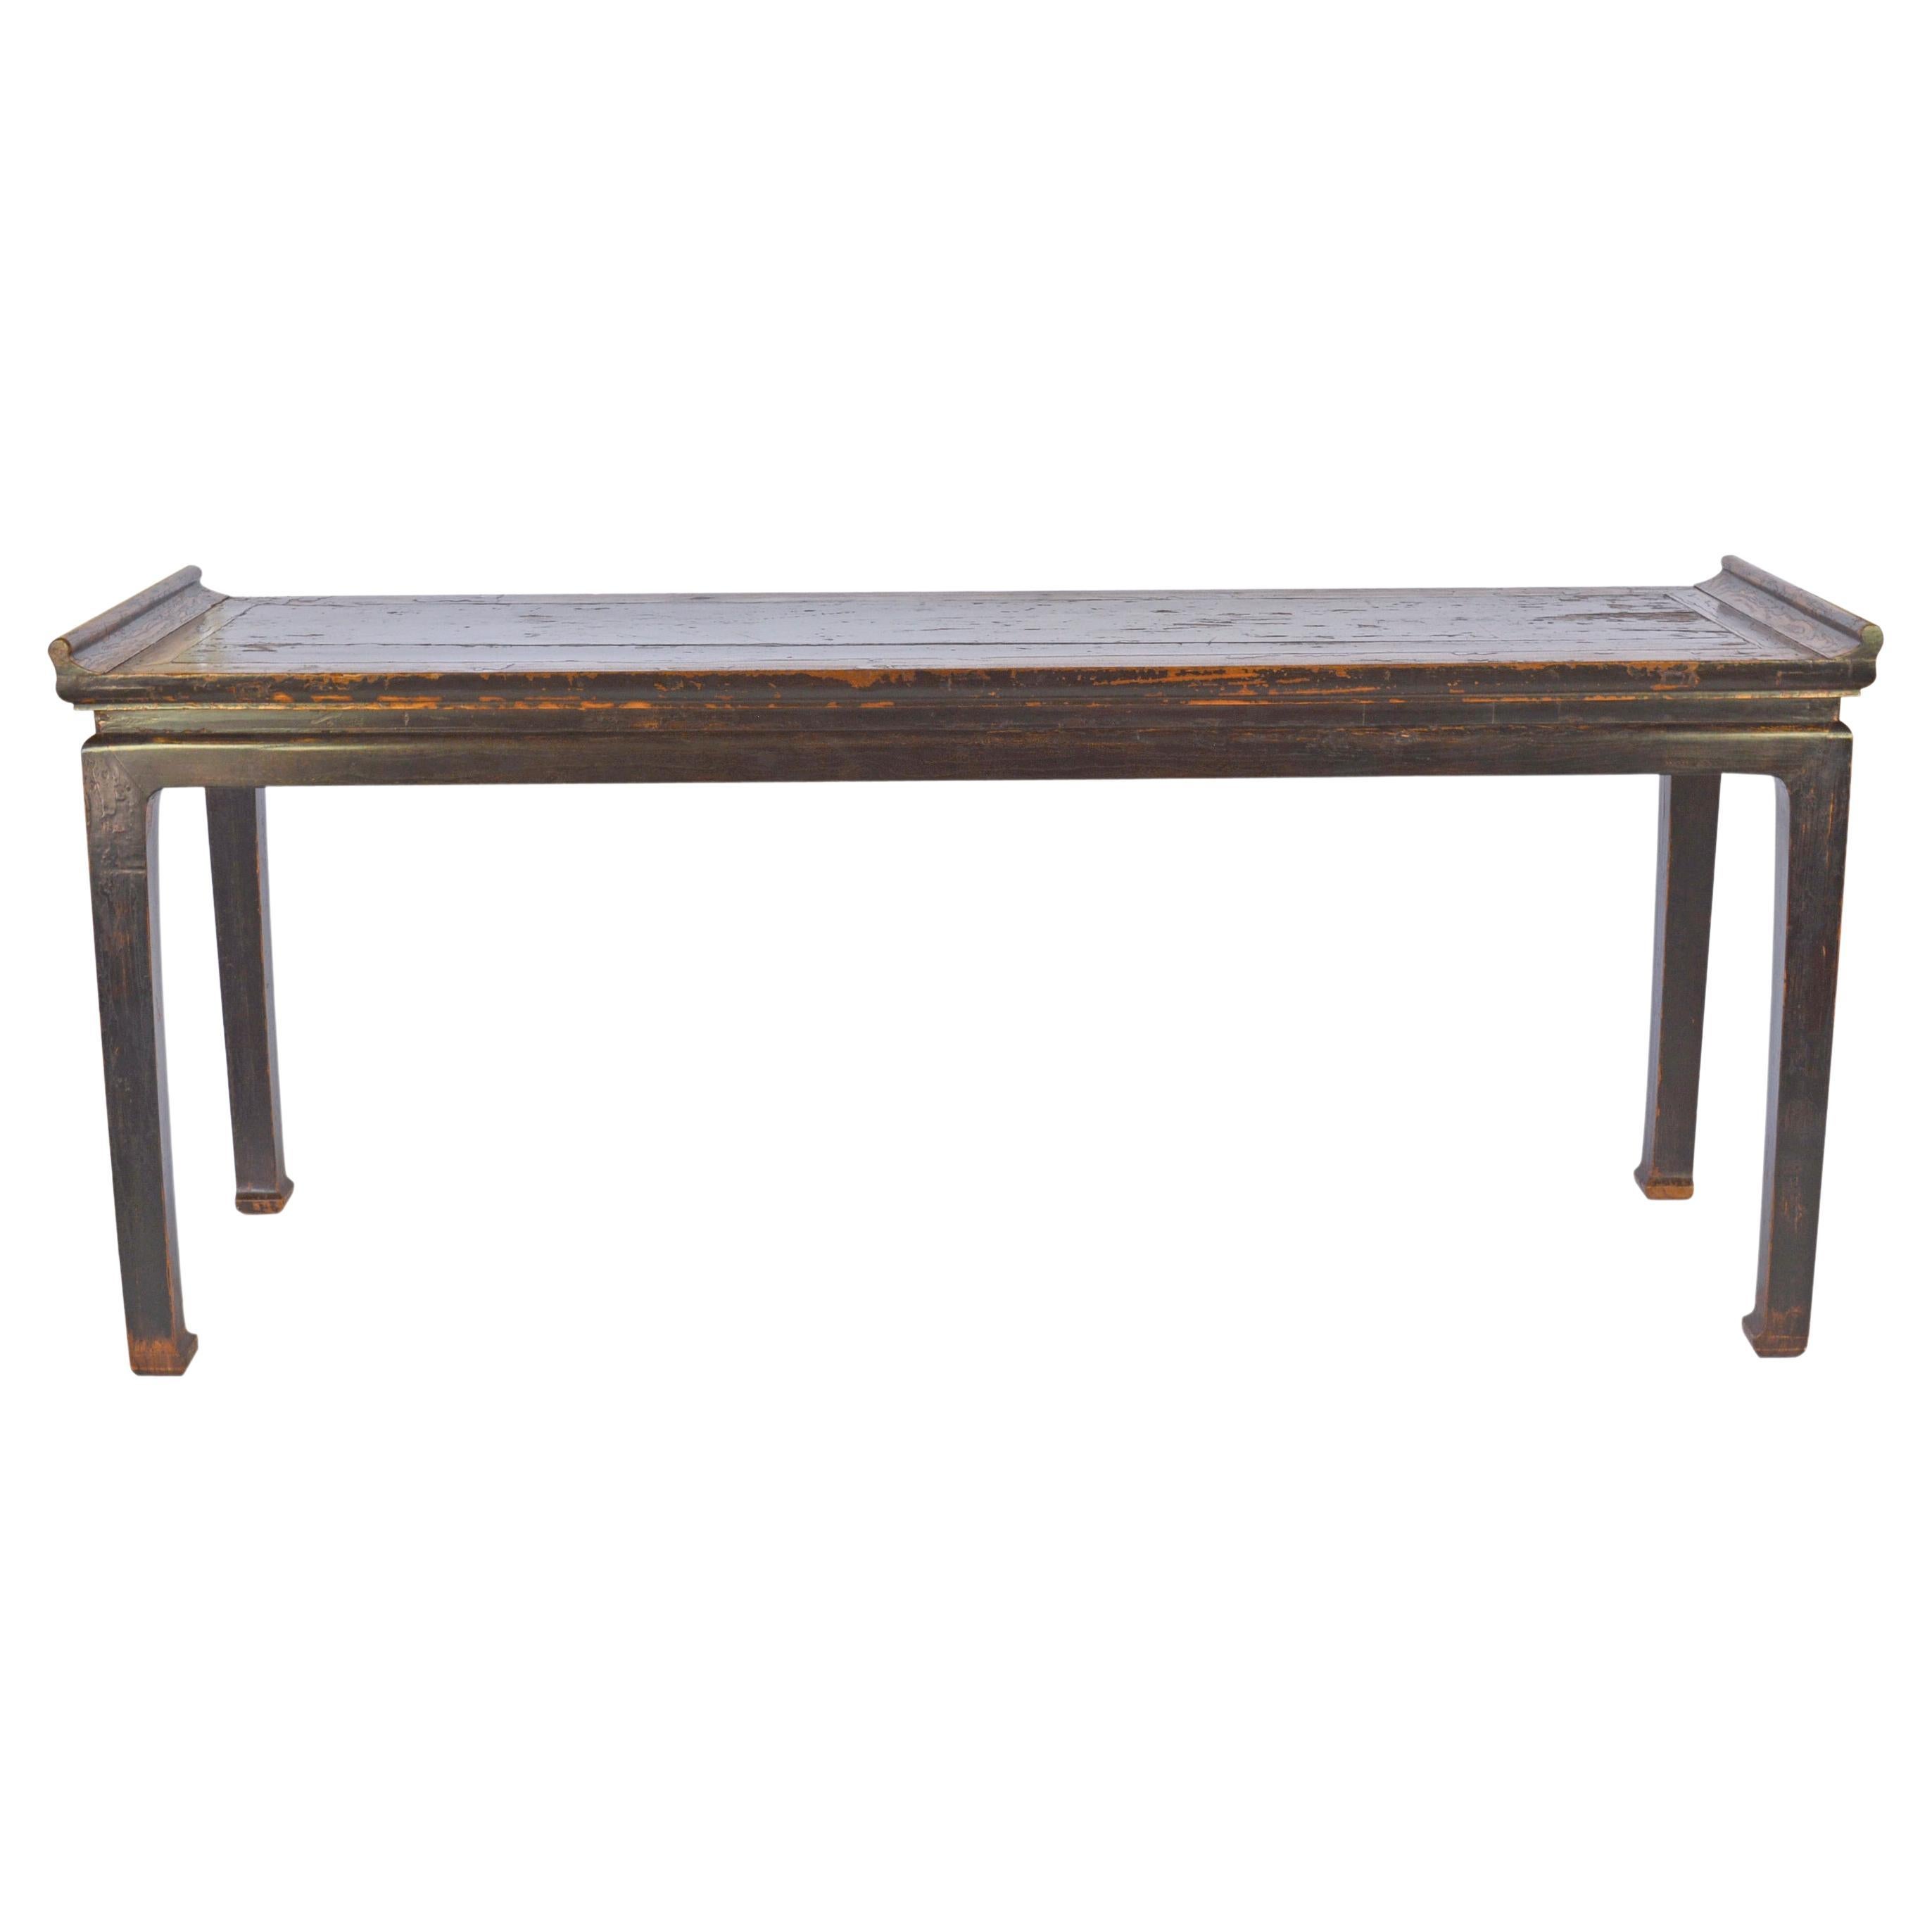 18th Century Black Lacquer Painting Table For Sale